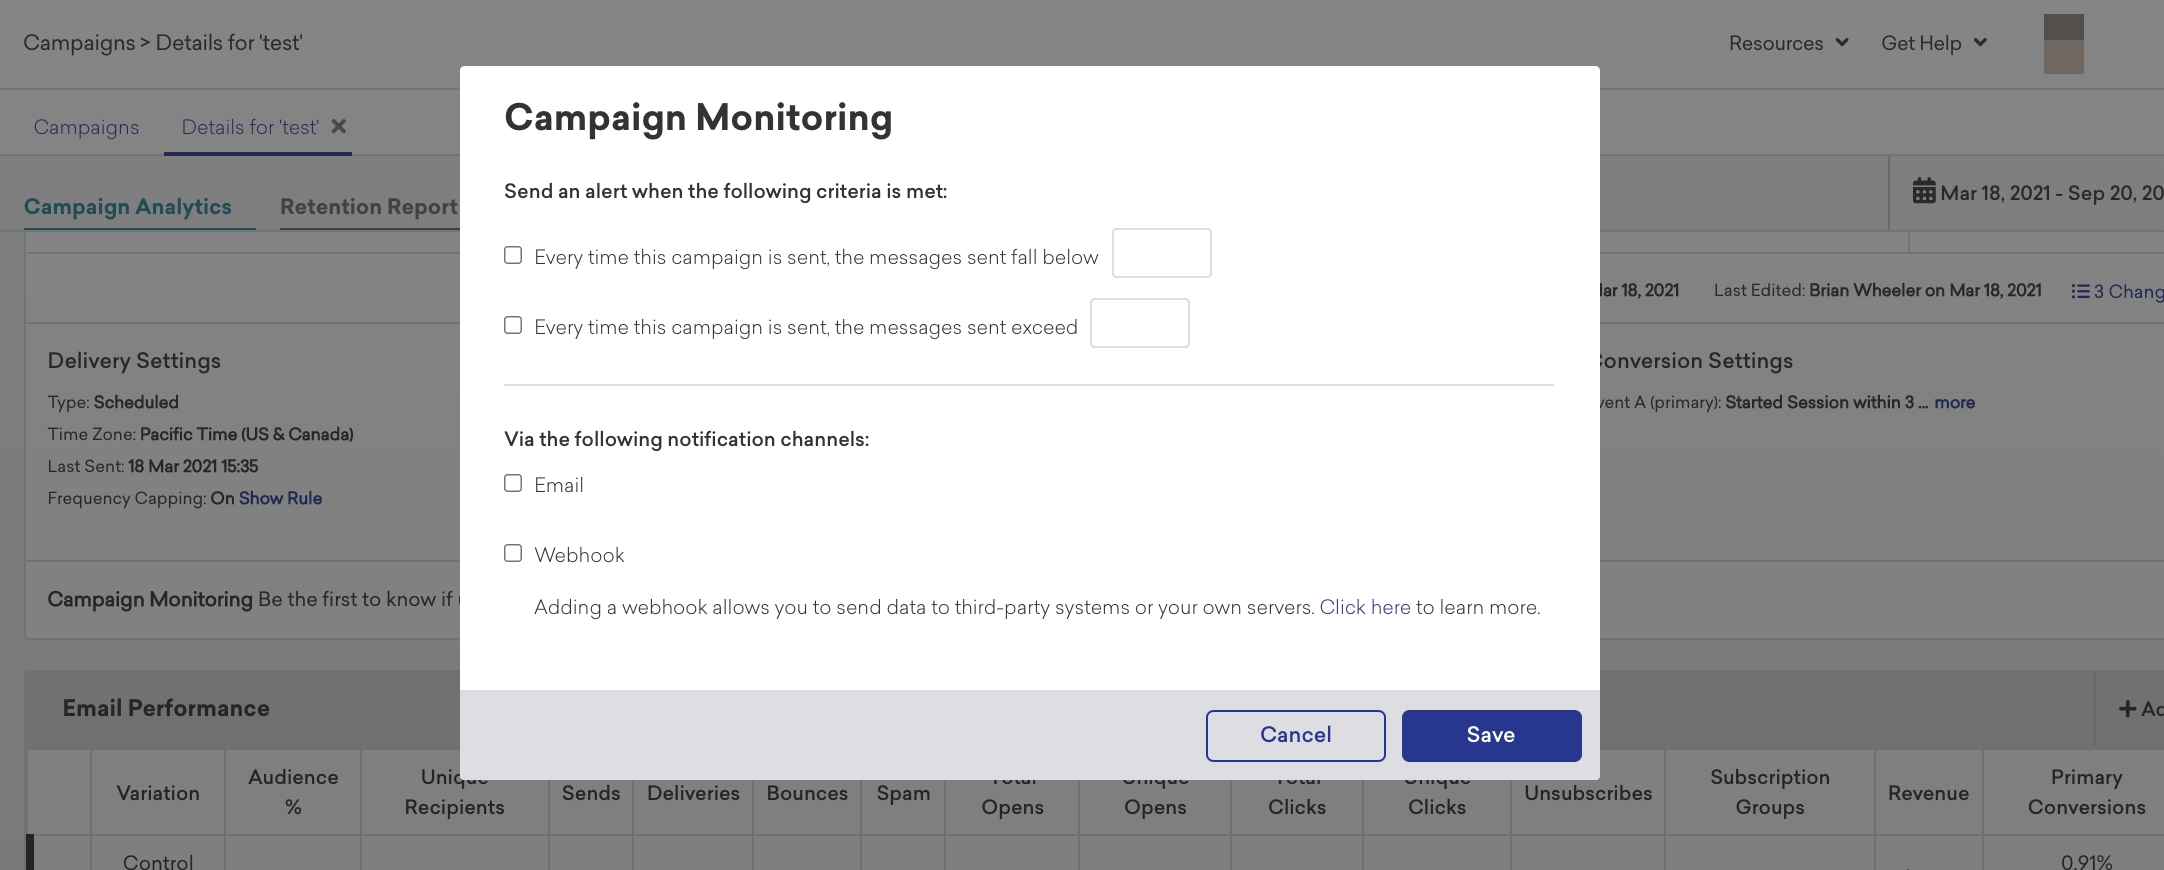 Campaign Monitoring dialog box with two buttons: Cancel and Save.